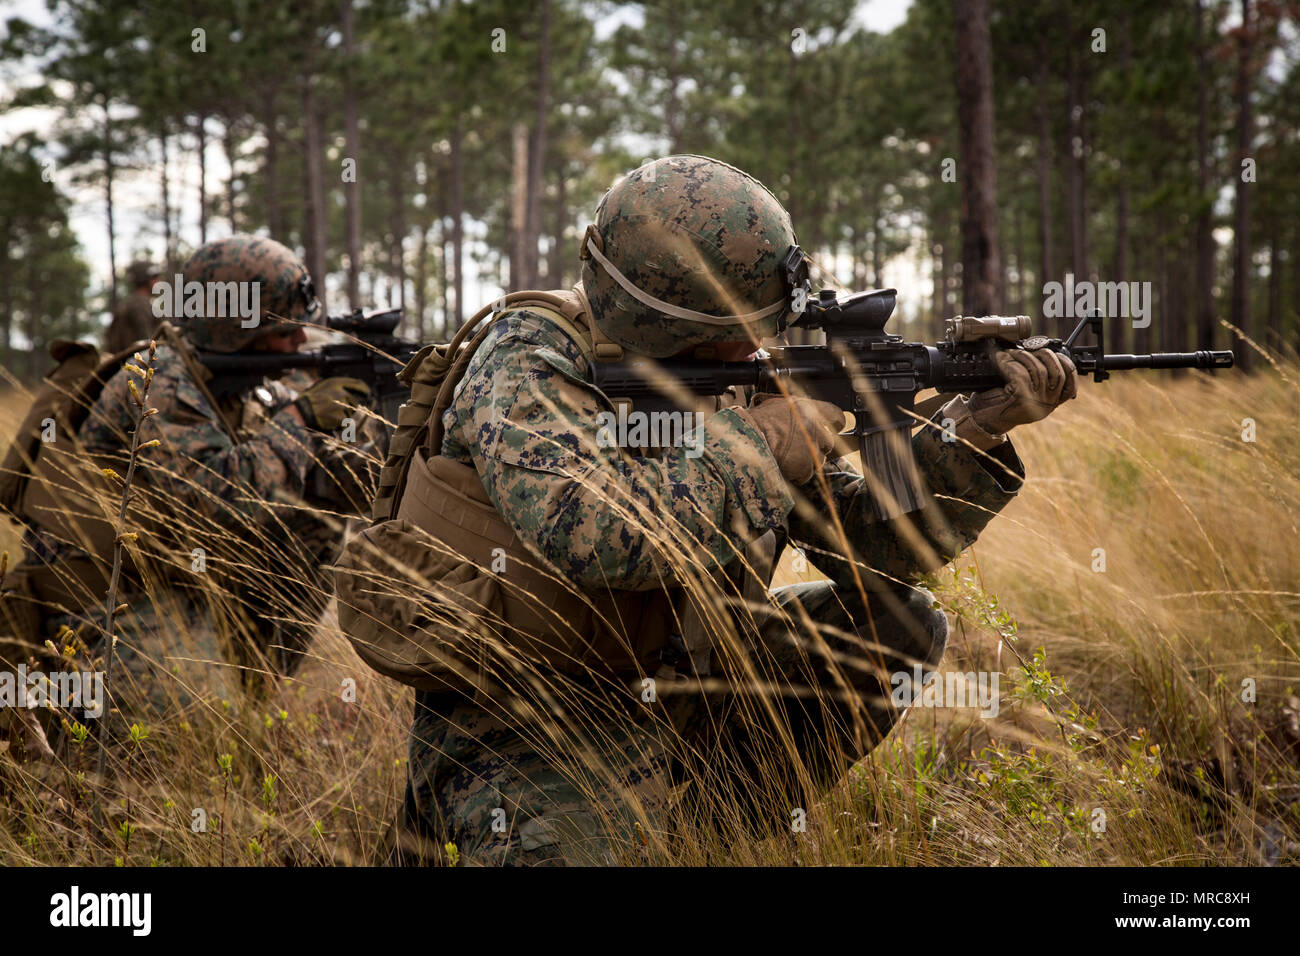 U.S. Marines attached to Advanced Infantry Training Battalion, School of Infantry-East (SOI-E), fire their M4A1 carbine during a combined arms exercise at Camp Lejeune, N.C., April 7, 2017. The mission of SOI-E is to train entry-level and advanced level Marines in the skills required of an Infantry Marine for the operating forces. (U.S. Marine Corps photo by Cpl. Manuel Serrano) Stock Photo